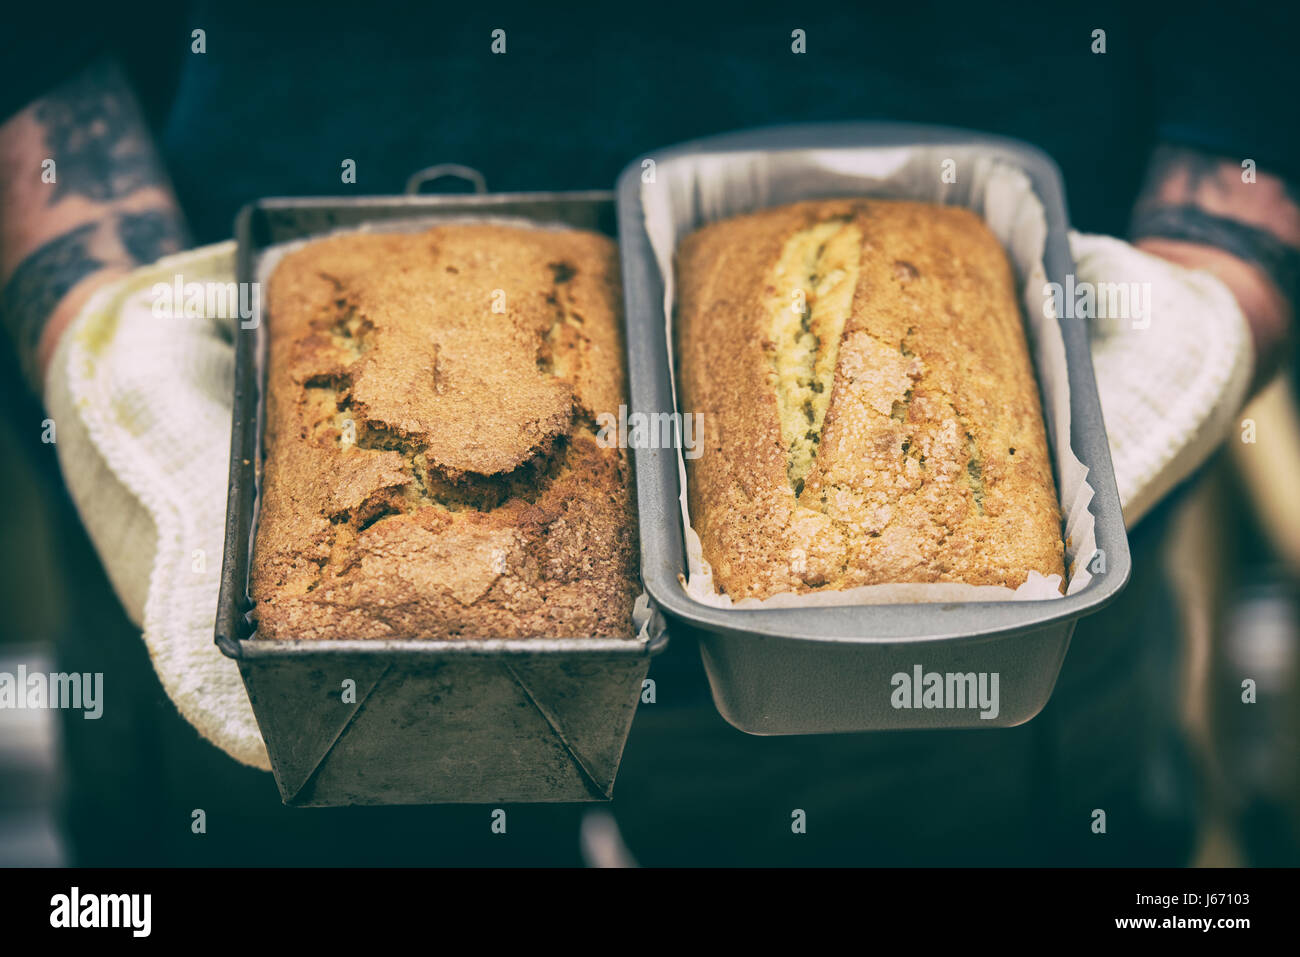 Baked banana cakes of which one is gluten free and the other is a regular bake. Applied vintage filter Stock Photo